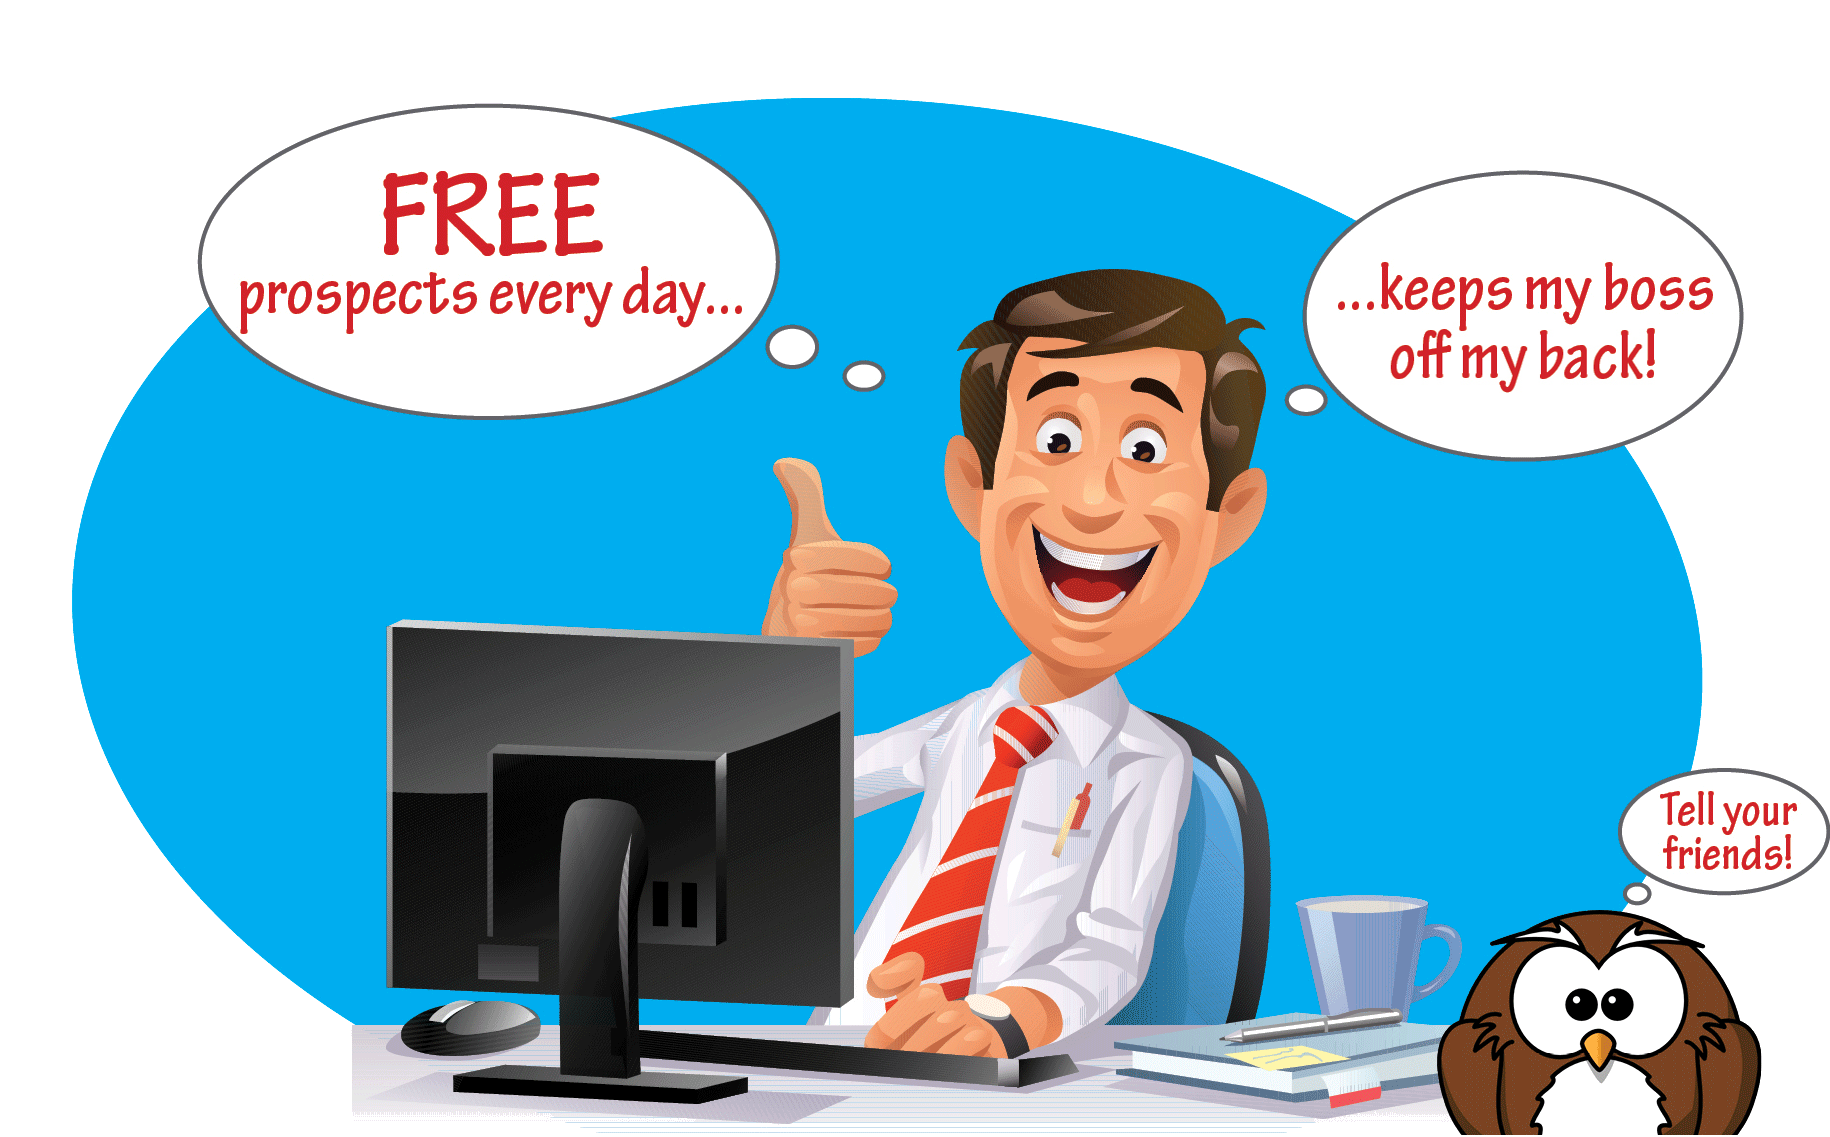 Salespeople know that FREE prospects every day keeps their boss off their back!